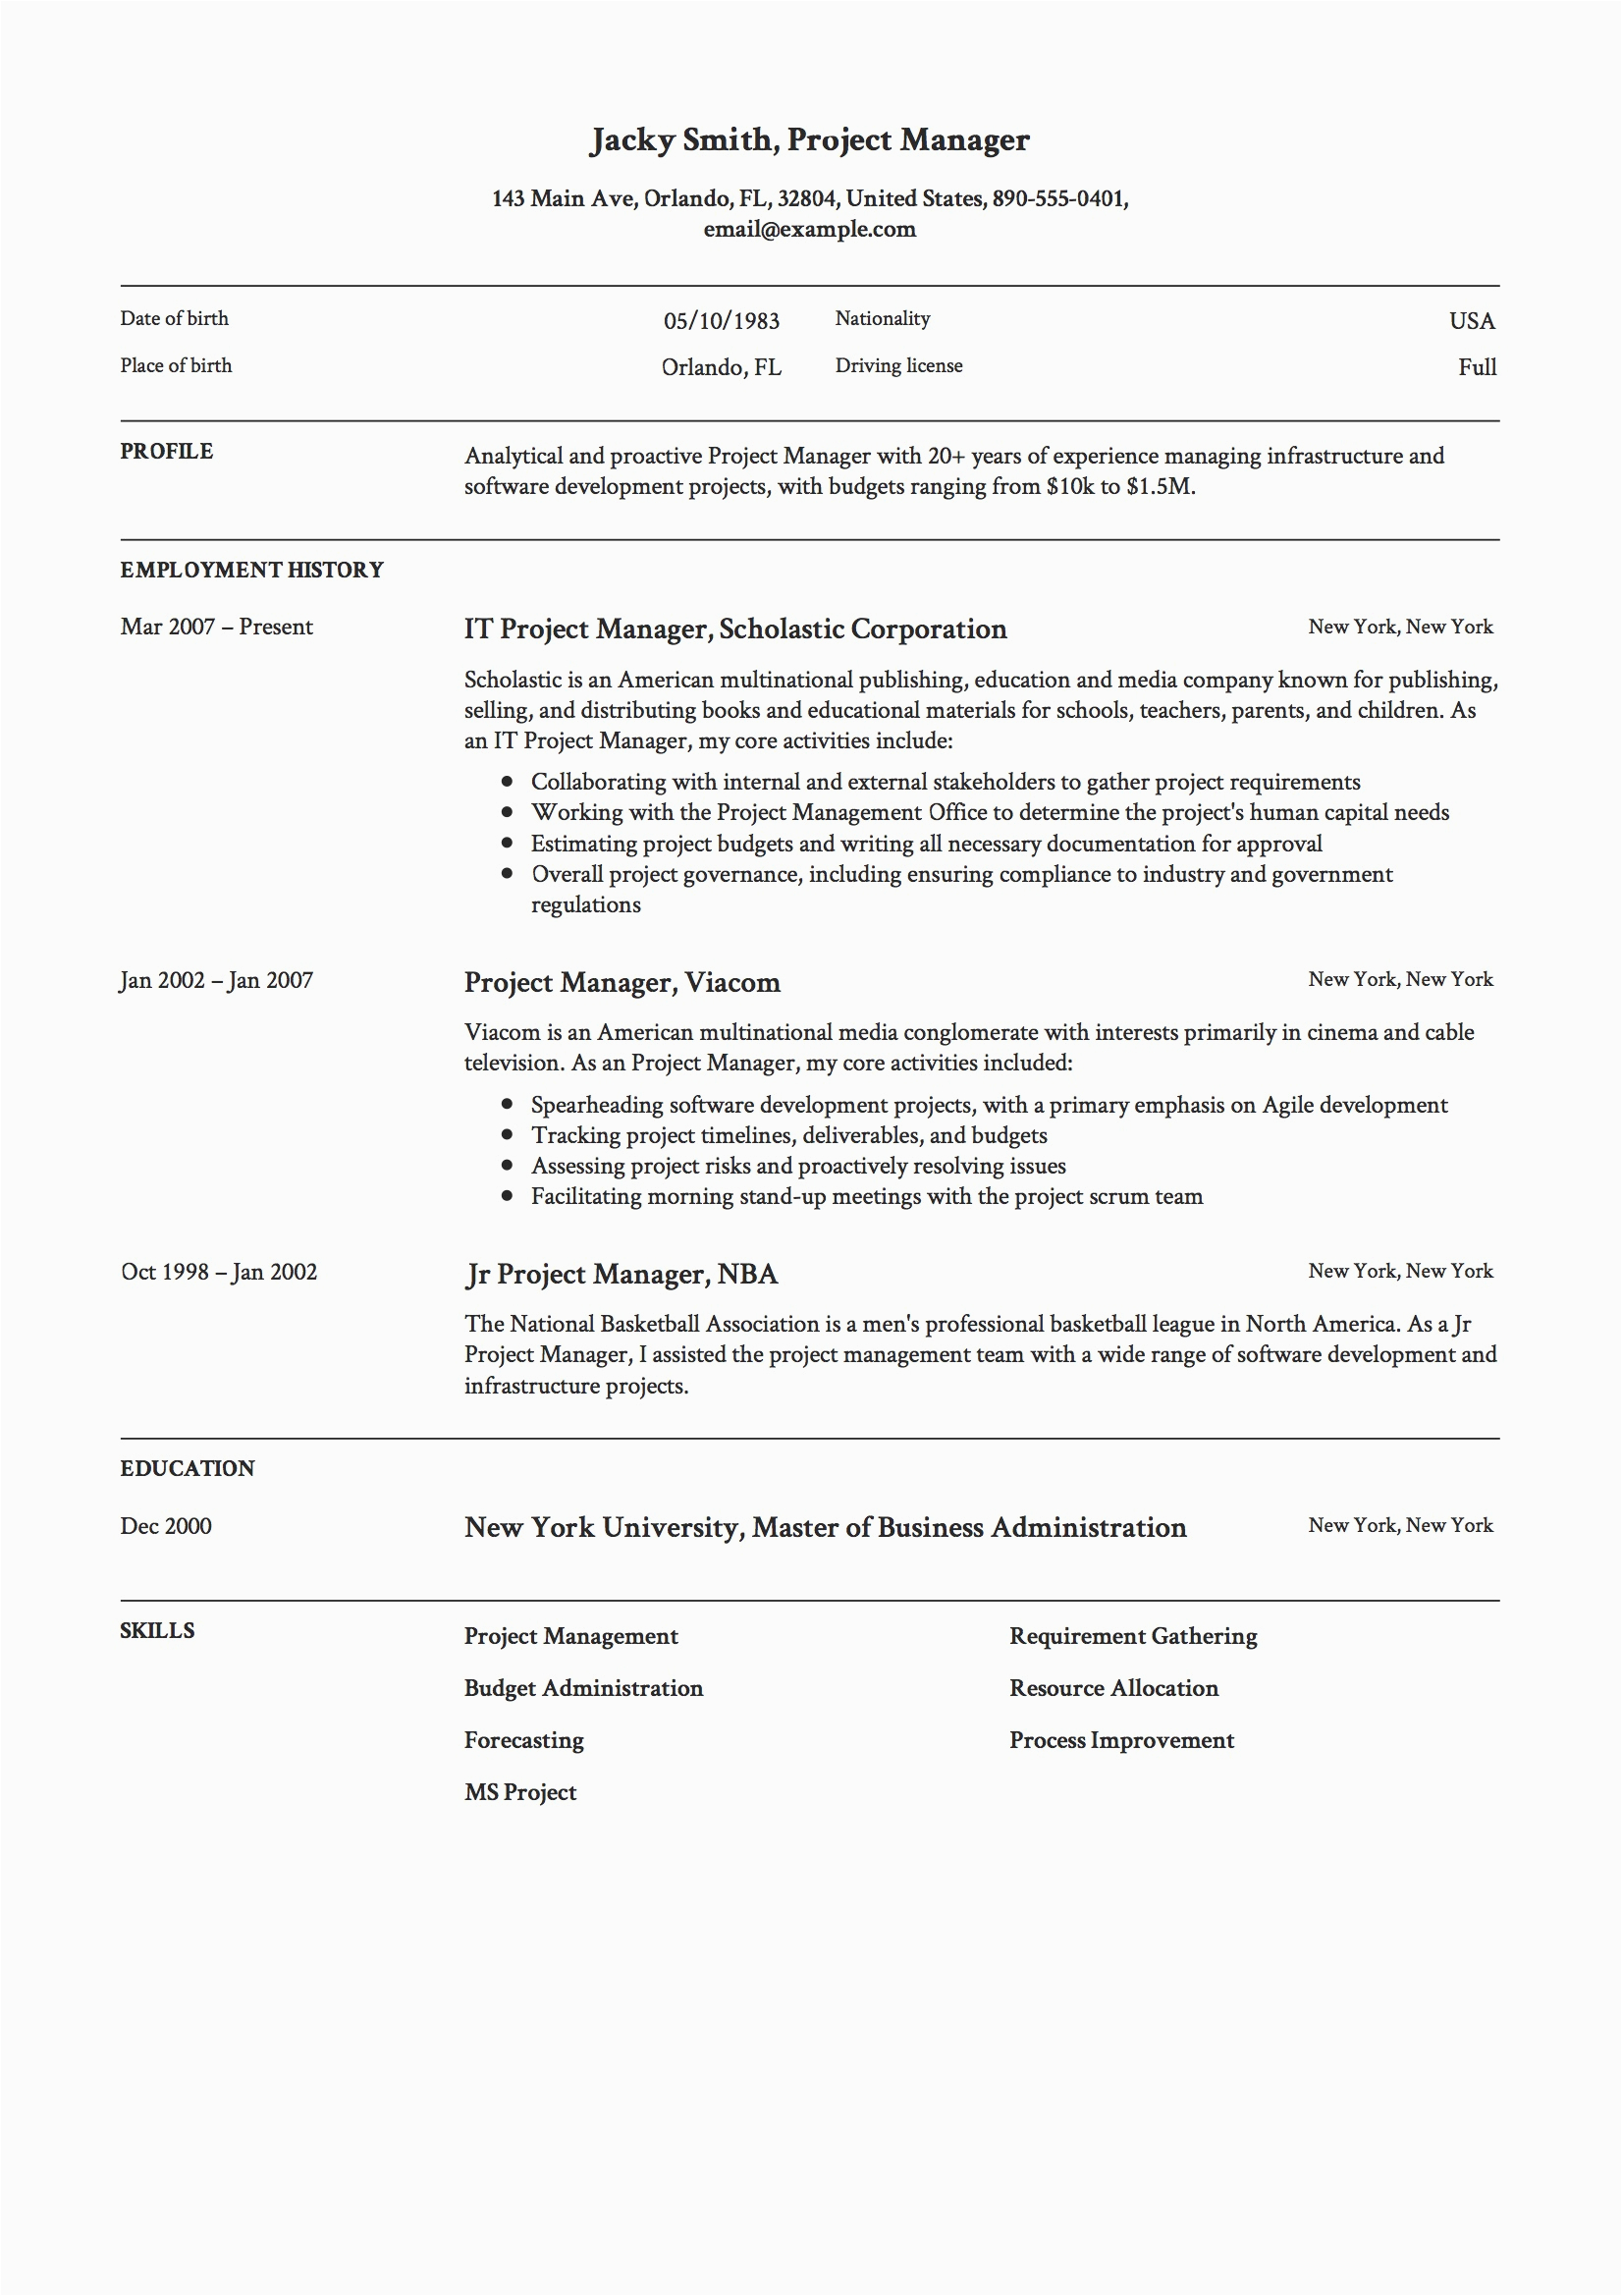 It Project Manager Resume Template Free Download 76 Free Resume Templates [2021] Pdf & Word Downloads